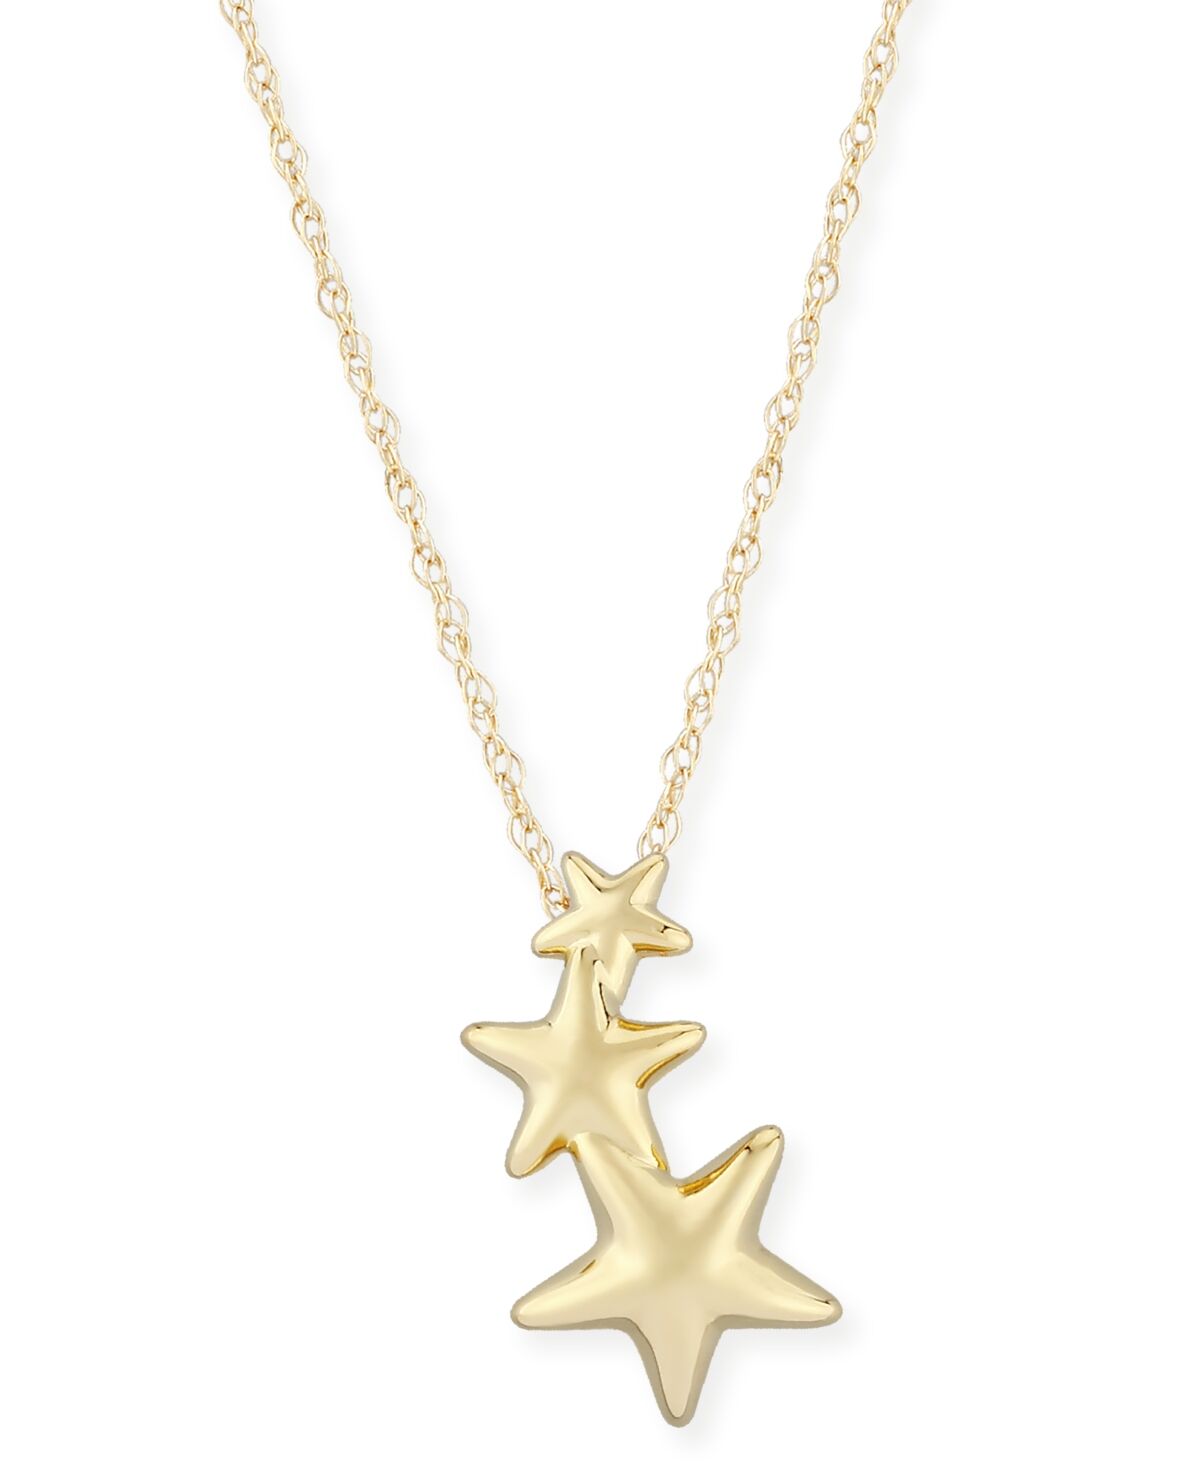 Macy's Triple Star Crawler Necklace Set in 14k Gold - No Size